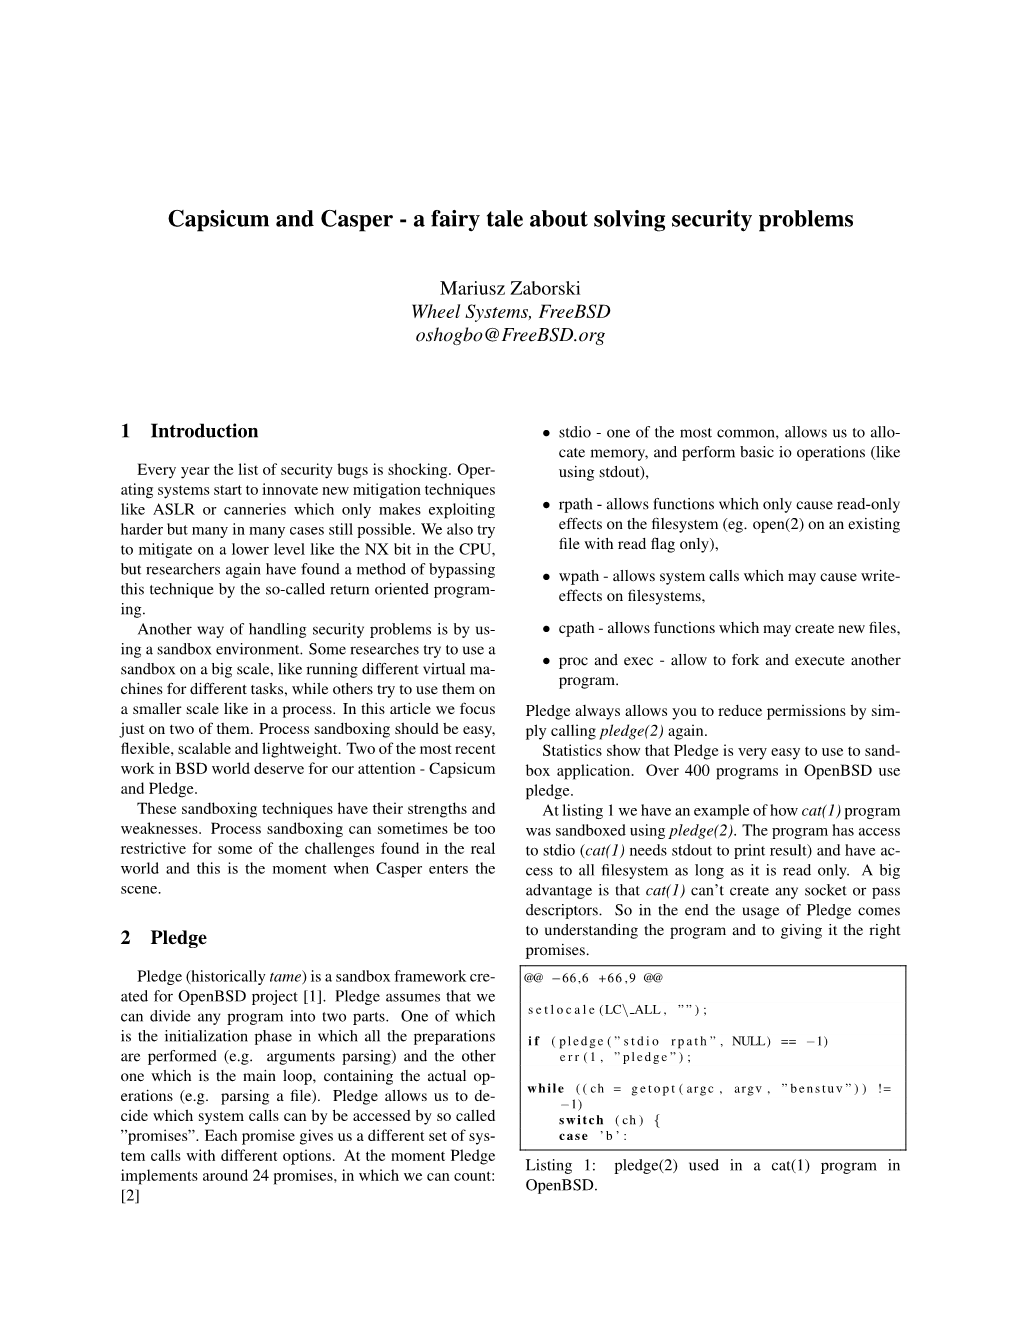 Capsicum and Casper - a Fairy Tale About Solving Security Problems